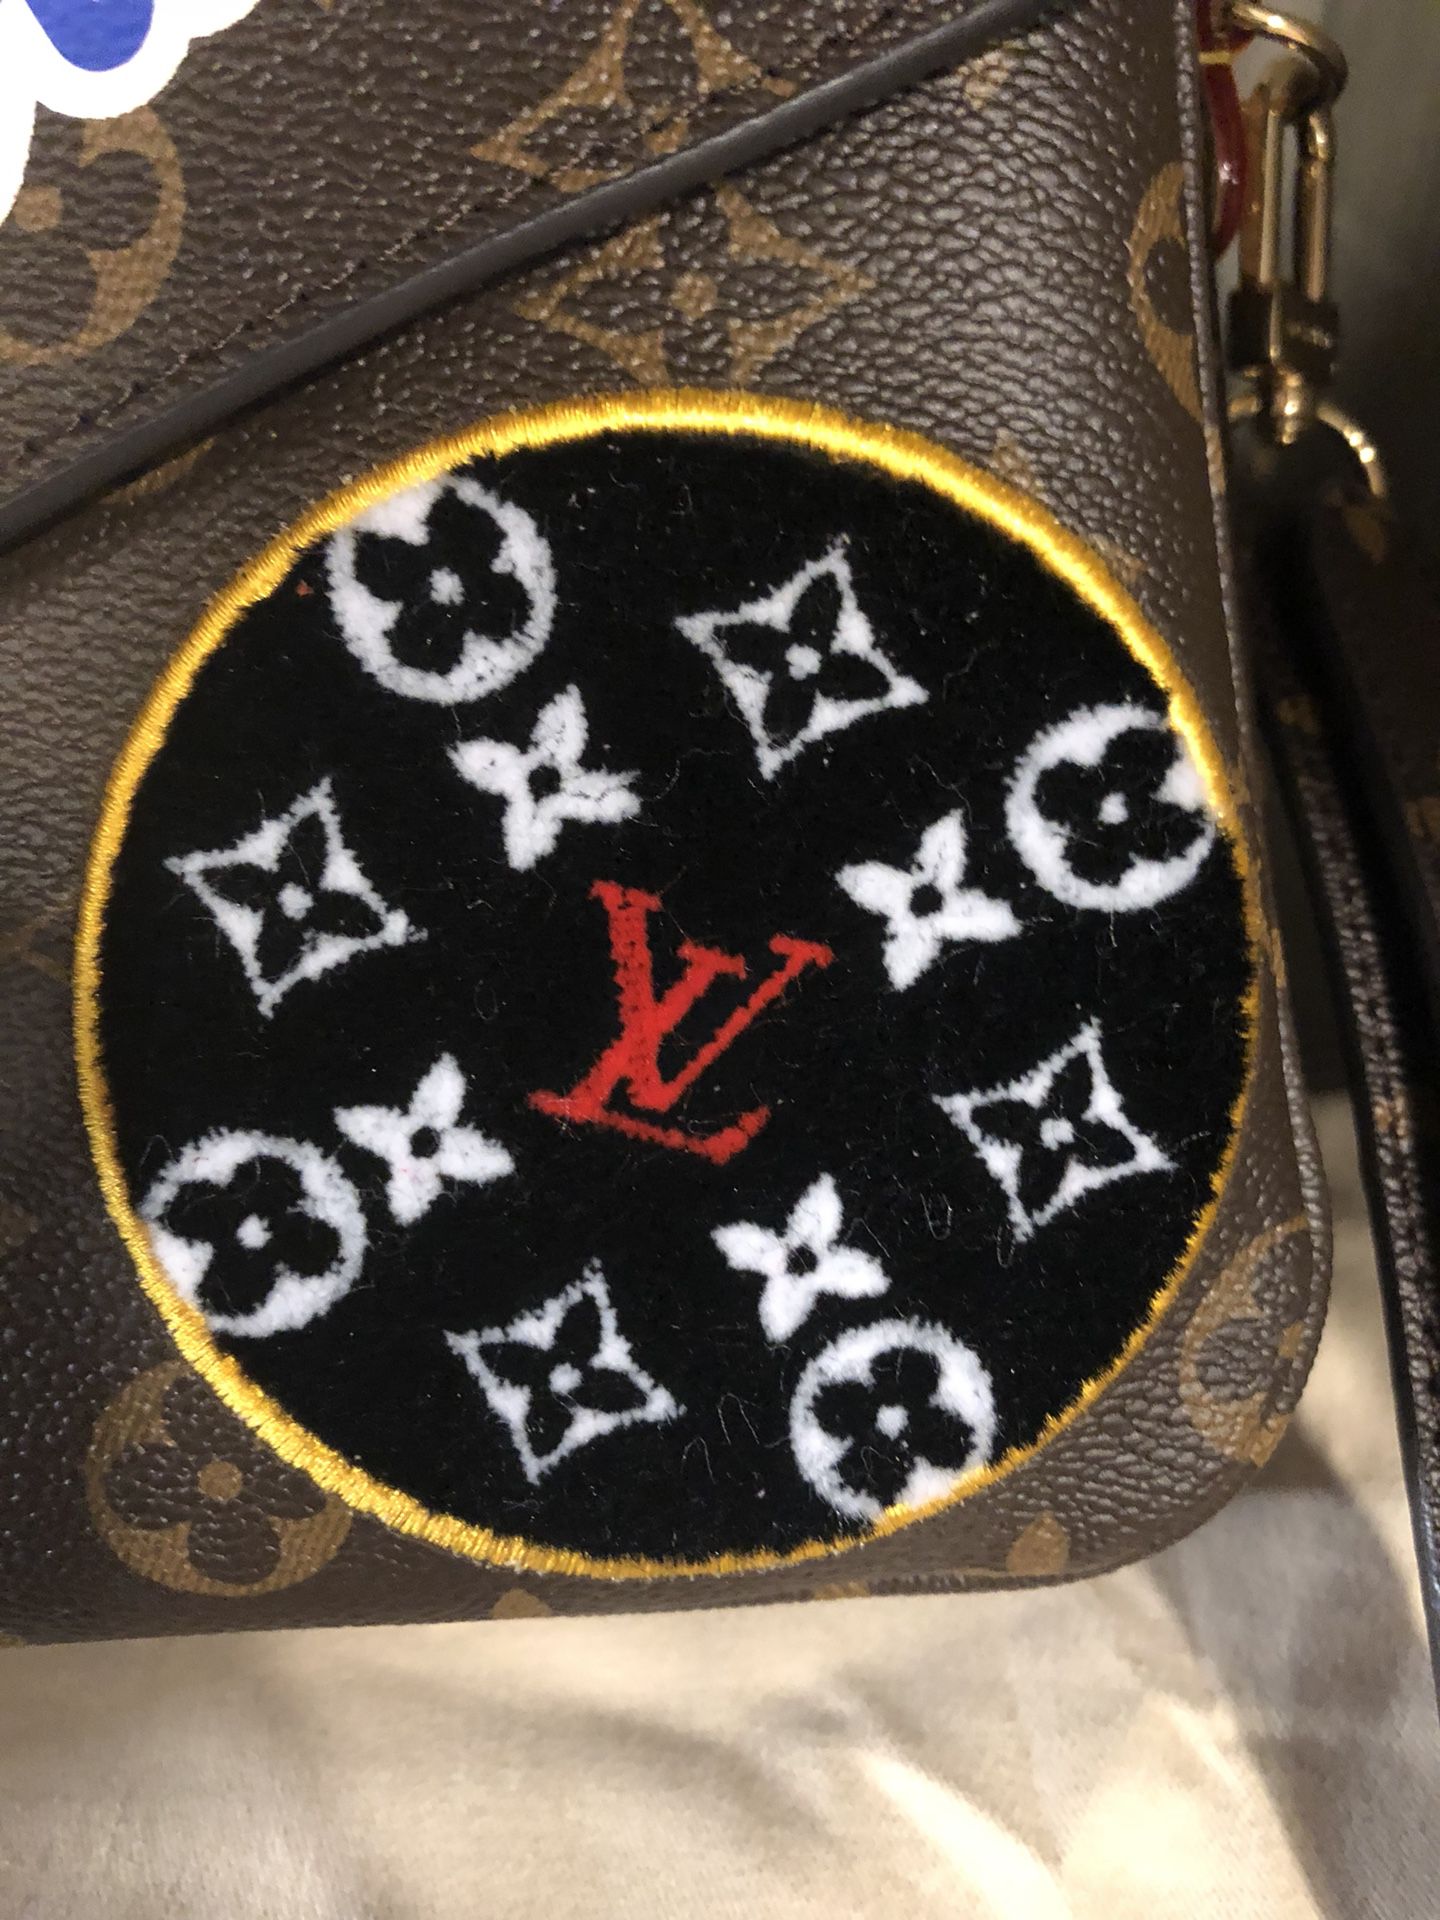 Authentic LV Pochette Accessoires NM for Sale in Seattle, WA - OfferUp